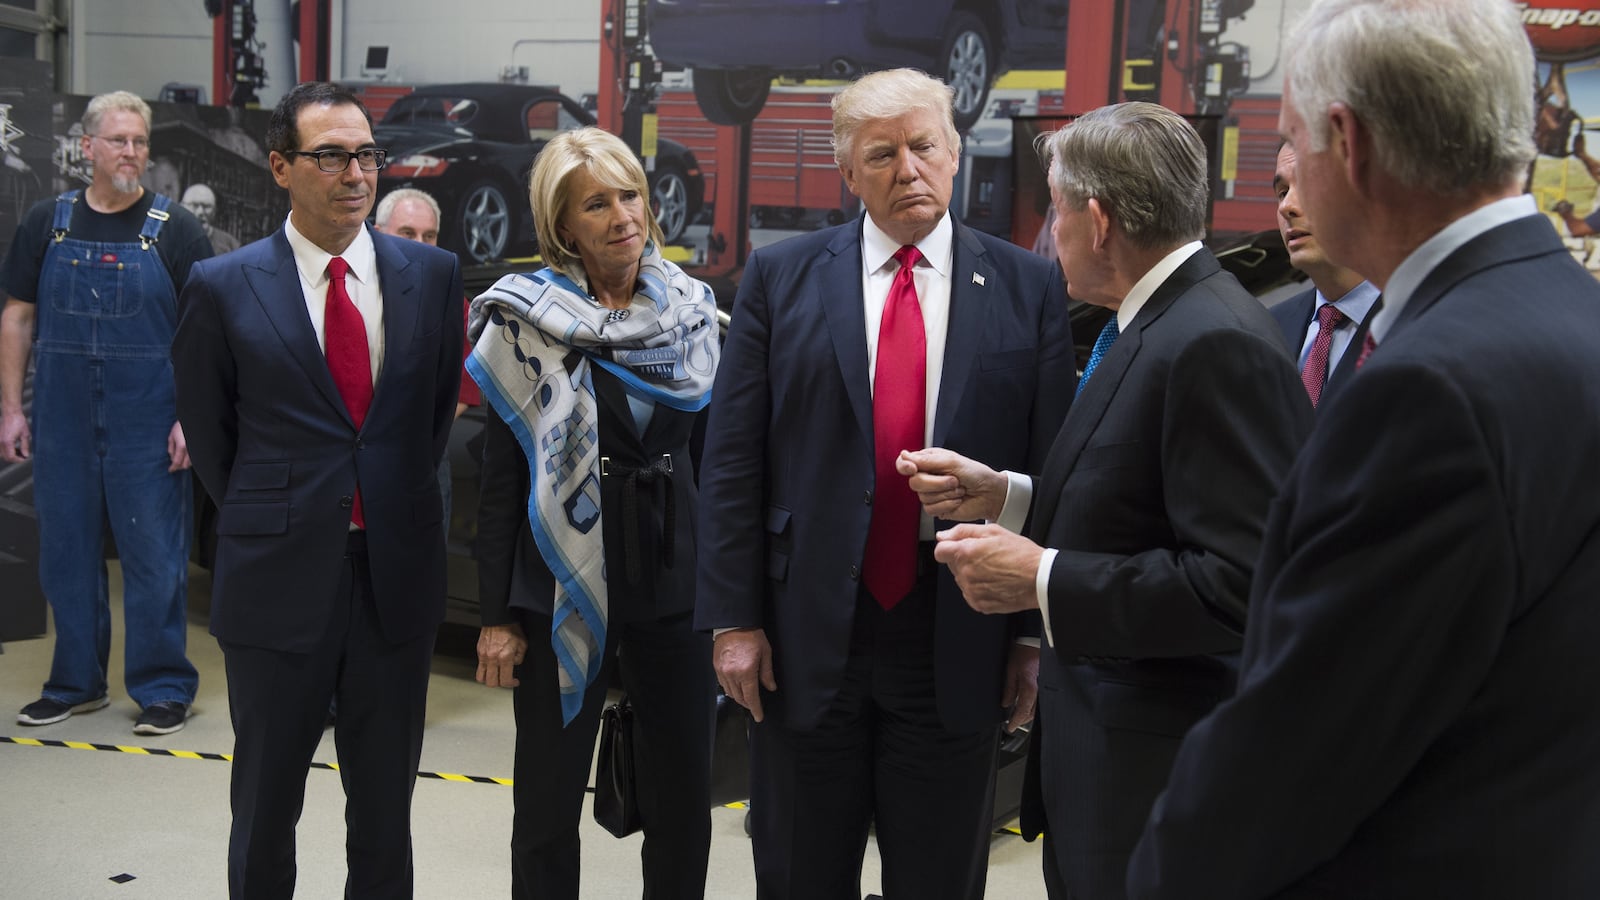 US President Donald Trump tours Snap-On Tools alongside Snap-On CEO Nick Pinchuk (2nd R), Secretary of Treasury Steve Mnuchin (L) and Secretary of Education Betsy DeVos (2nd L) in Kenosha, Wisconsin, April 18, 2017, prior to signing the Buy American, Hire American Executive Order. (Photo credit: SAUL LOEB/AFP/Getty Images)